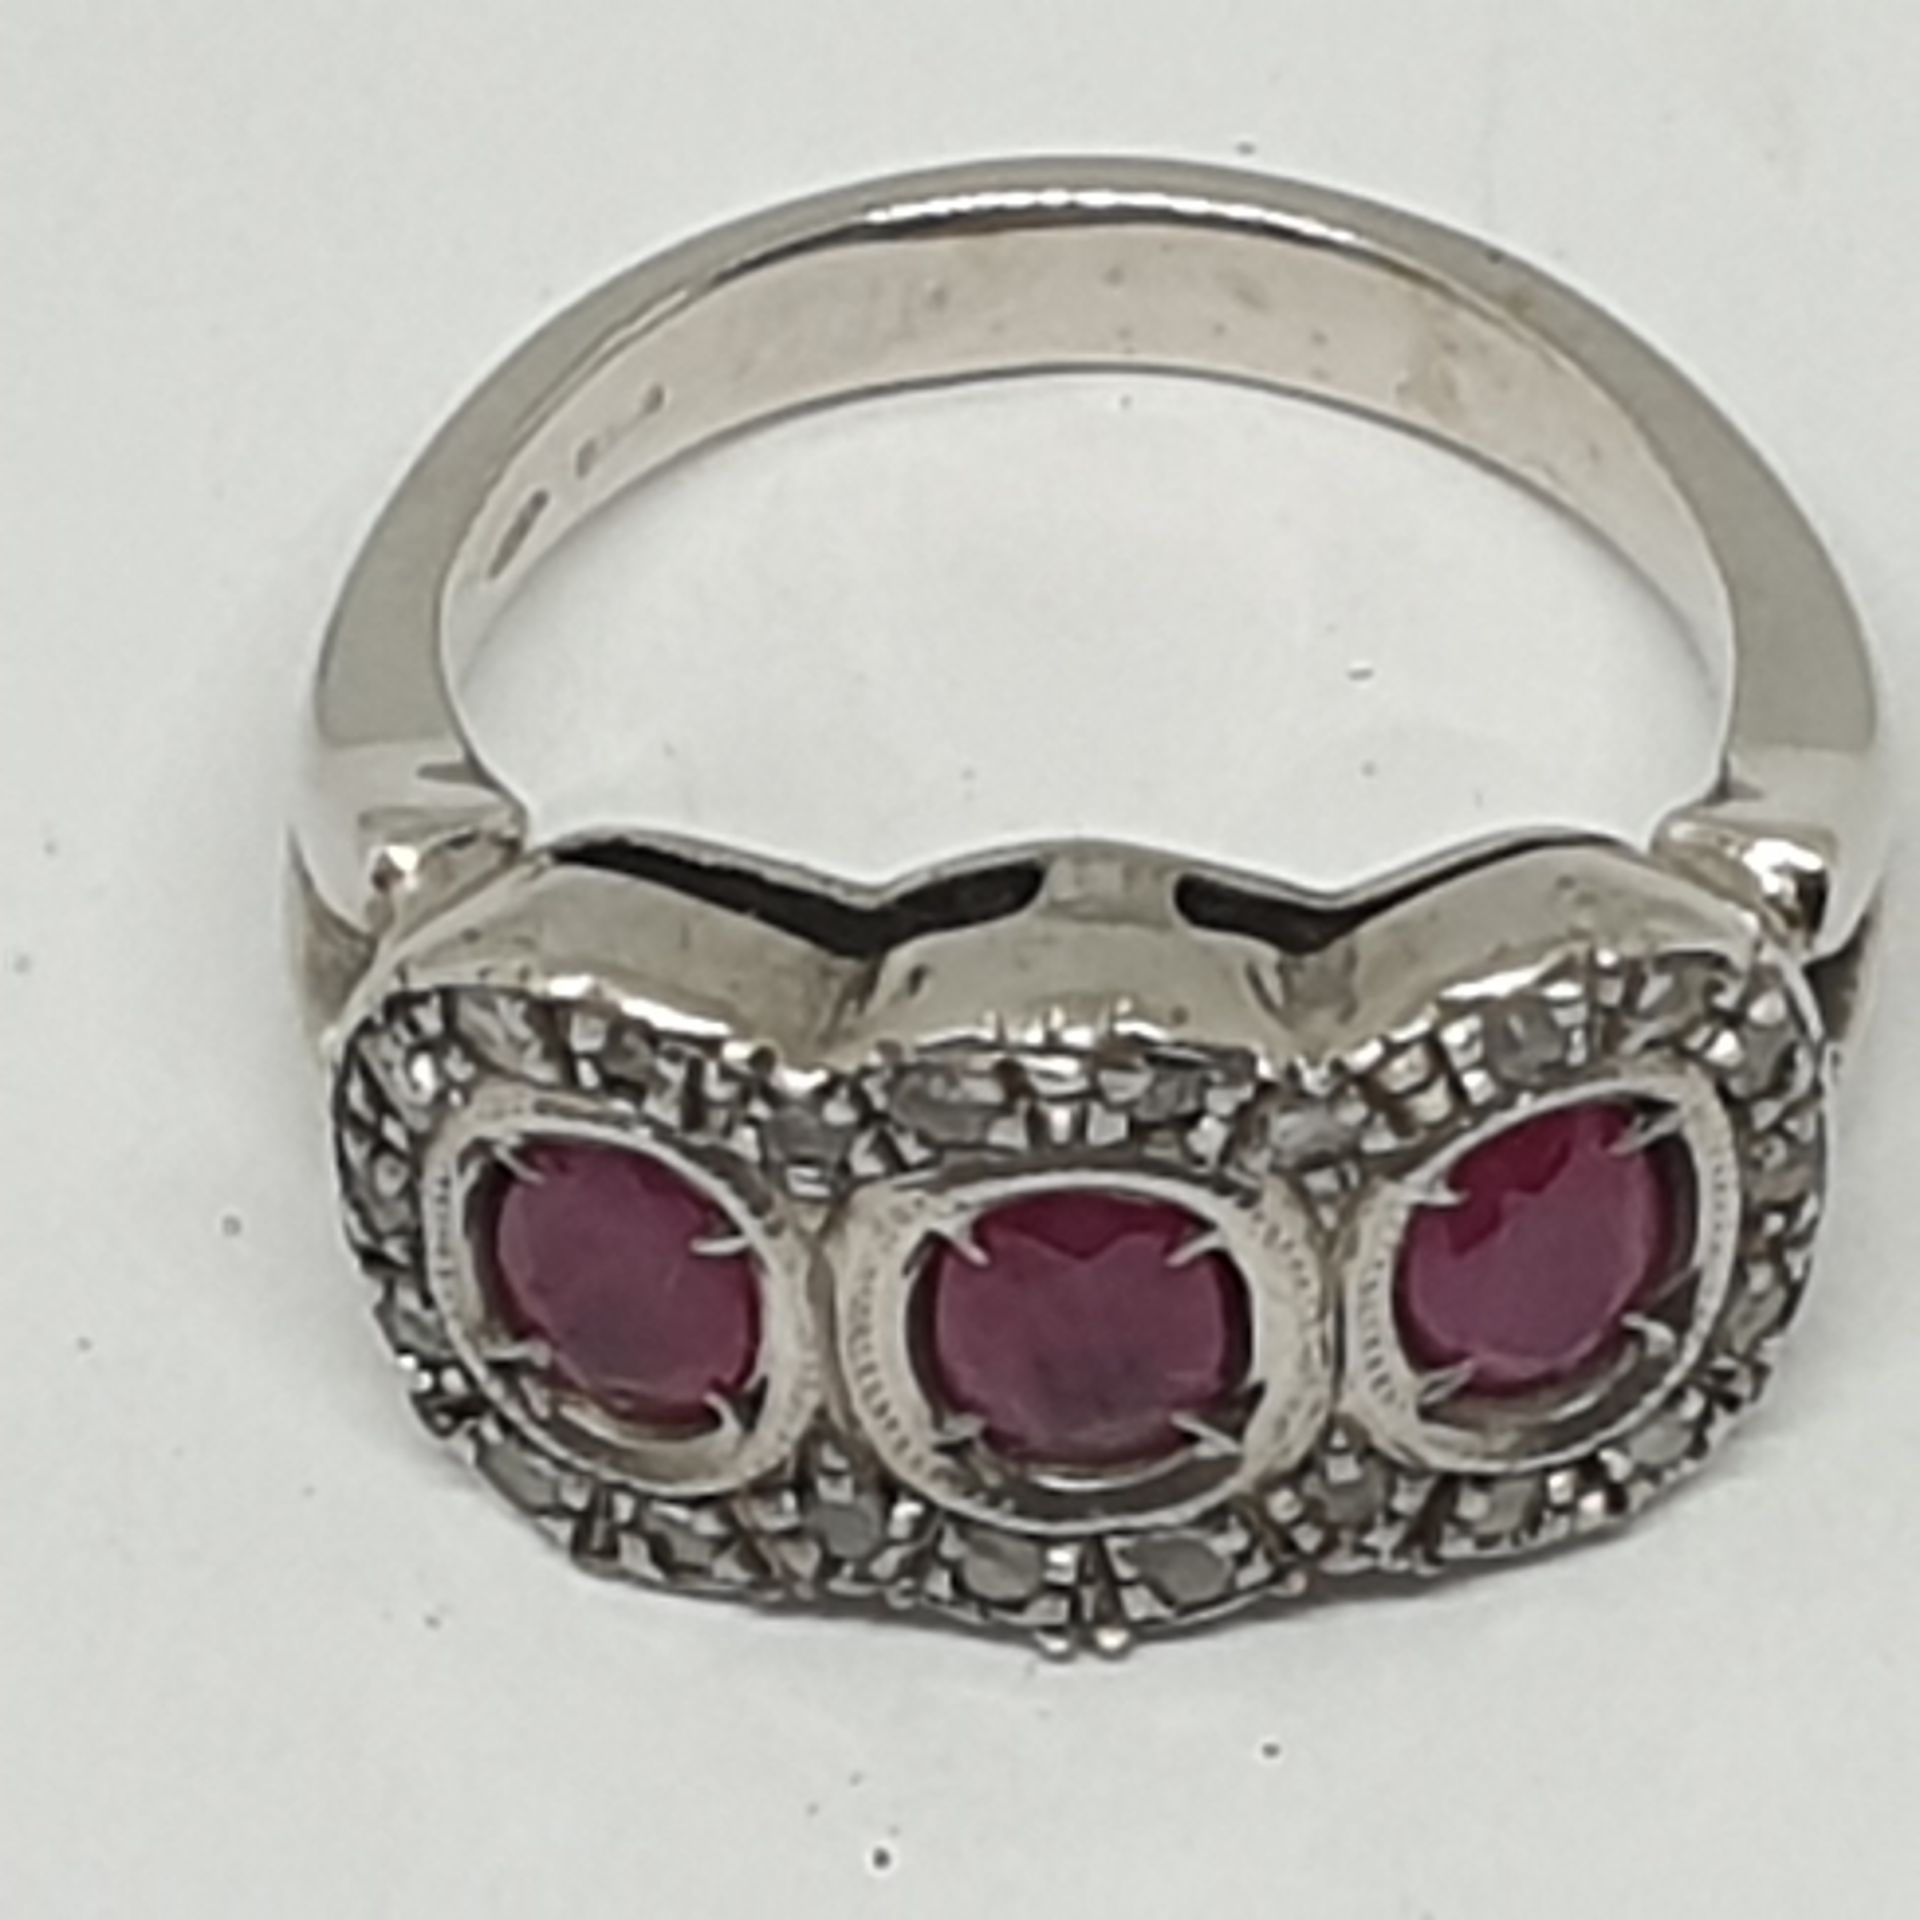 18 K GOLD RING 9.8 WITH 4 CENTRAL OVAL RUBIES FROM APPROXIMATELY 1.12 TOTAL CTS AND ROSETTE - Bild 4 aus 4